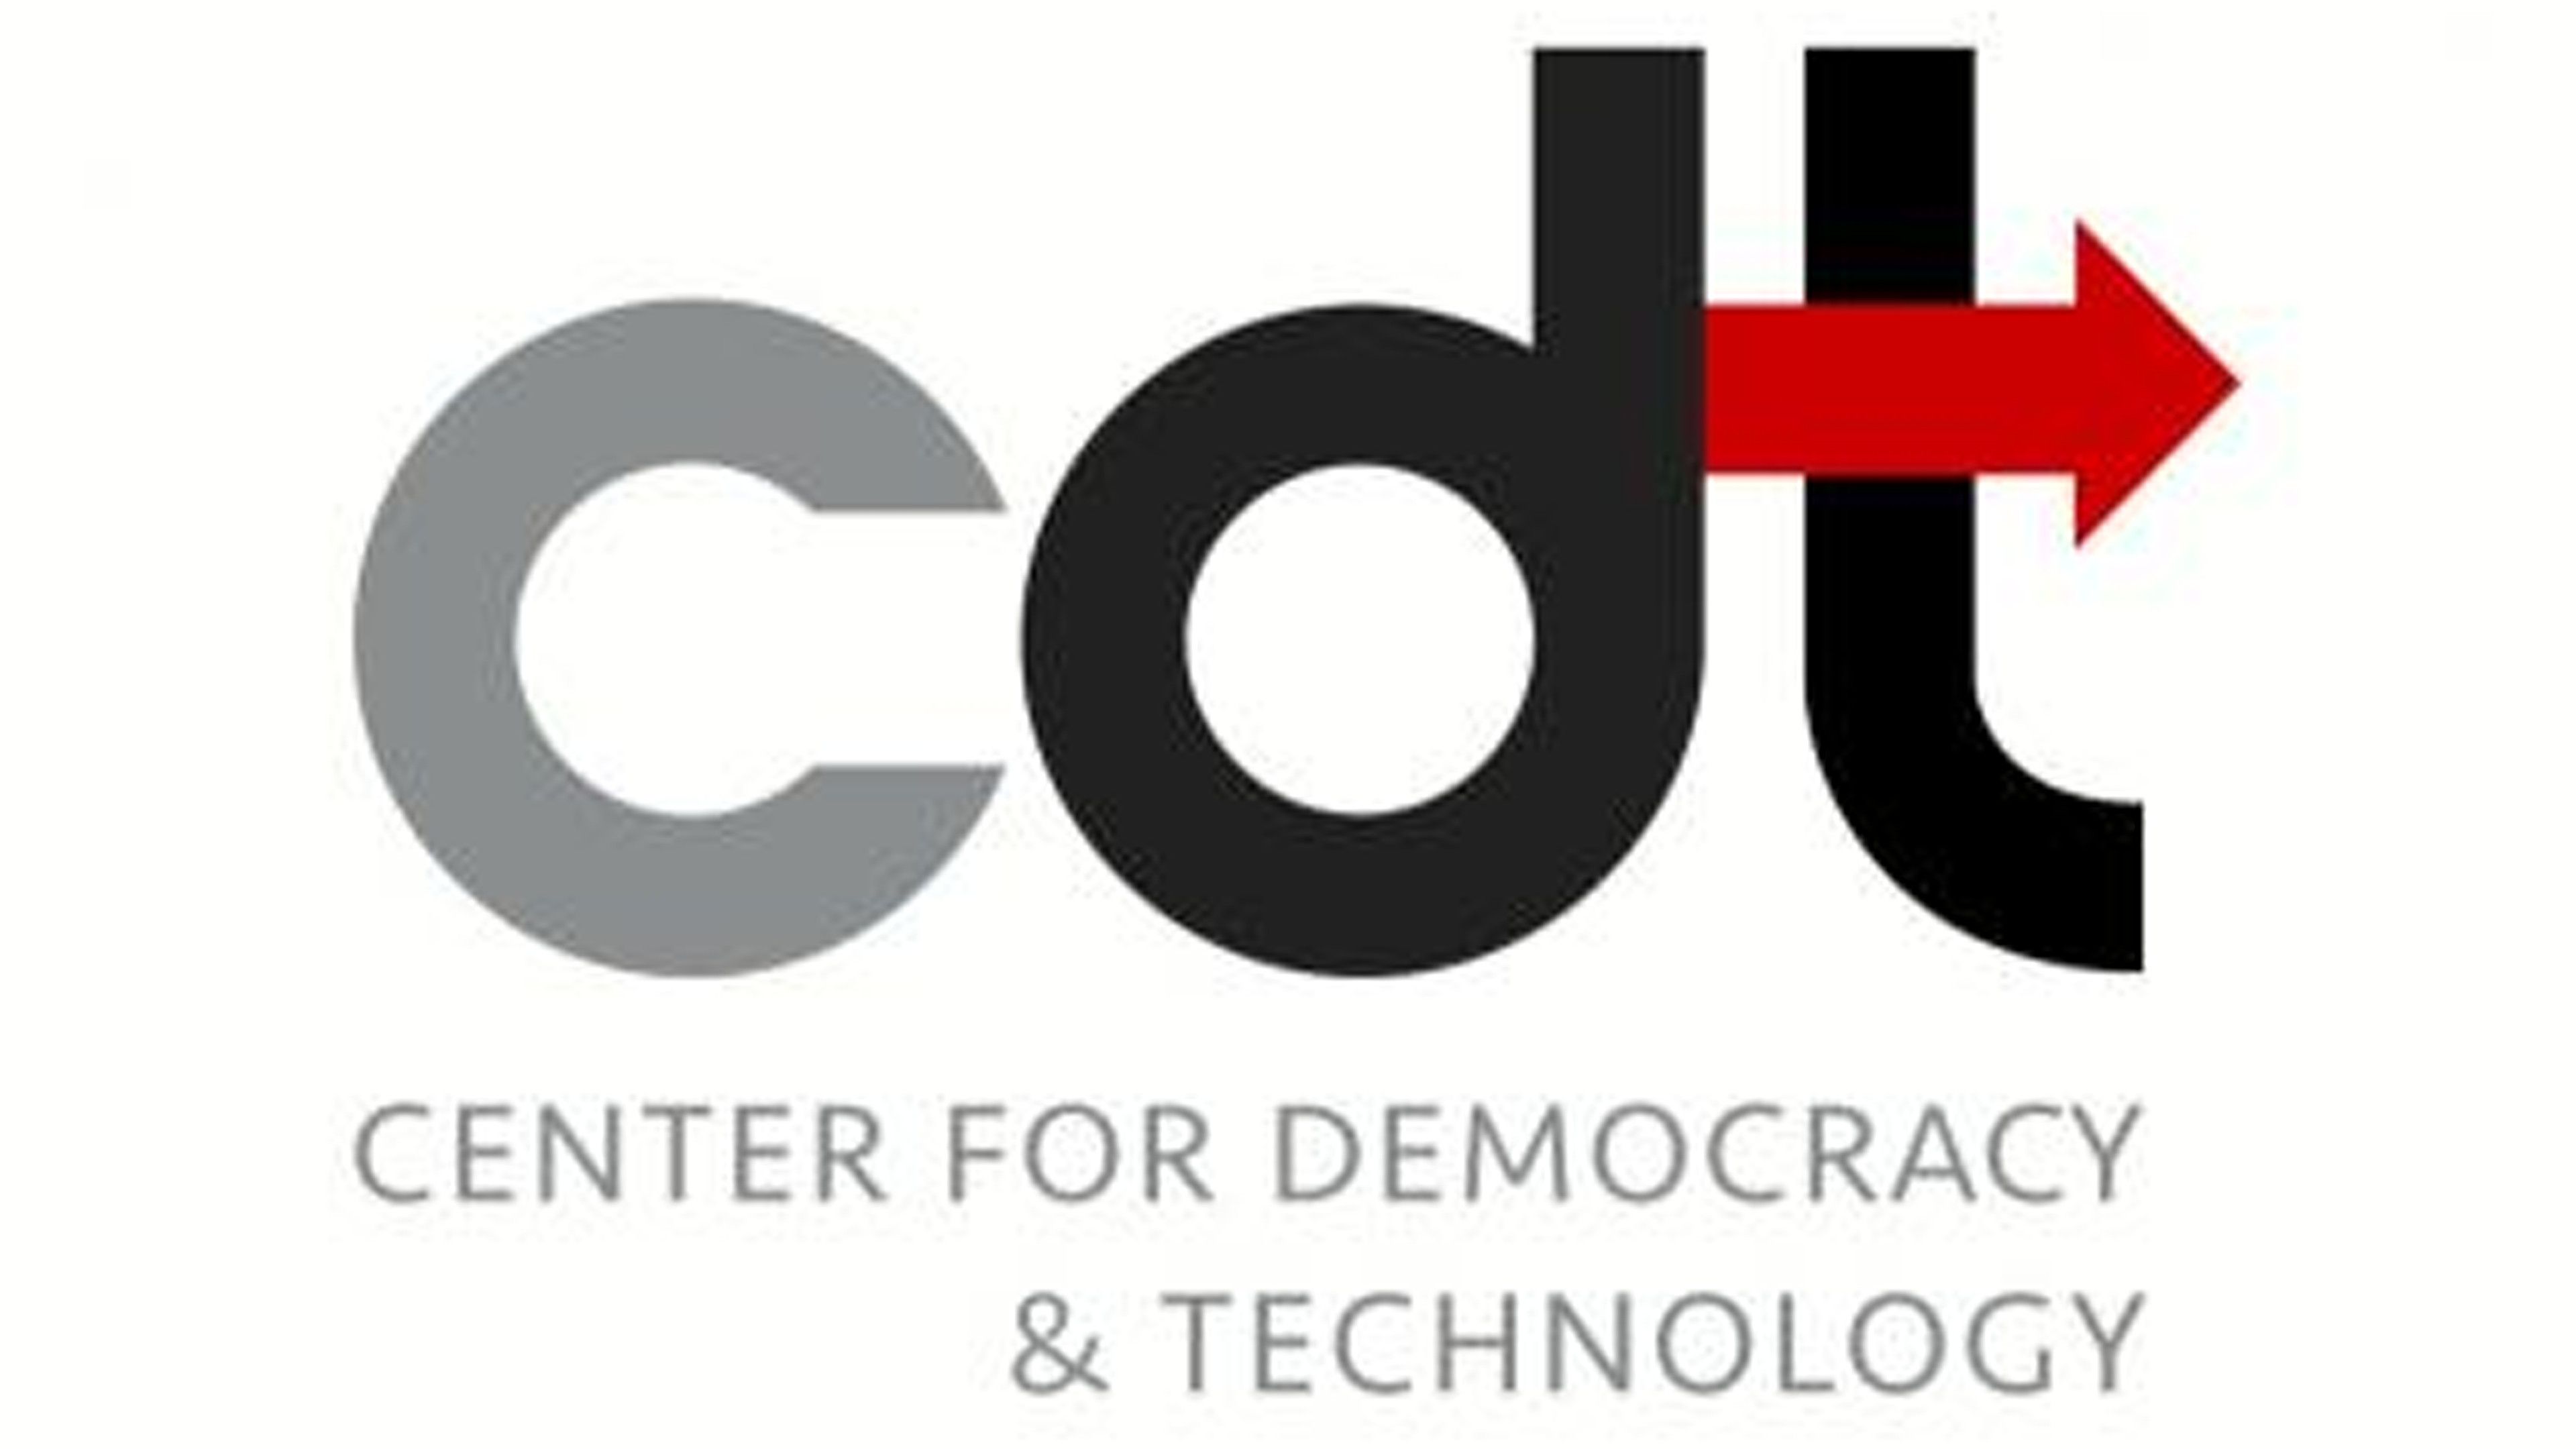 Mission Of The Center For Democracy And Technology